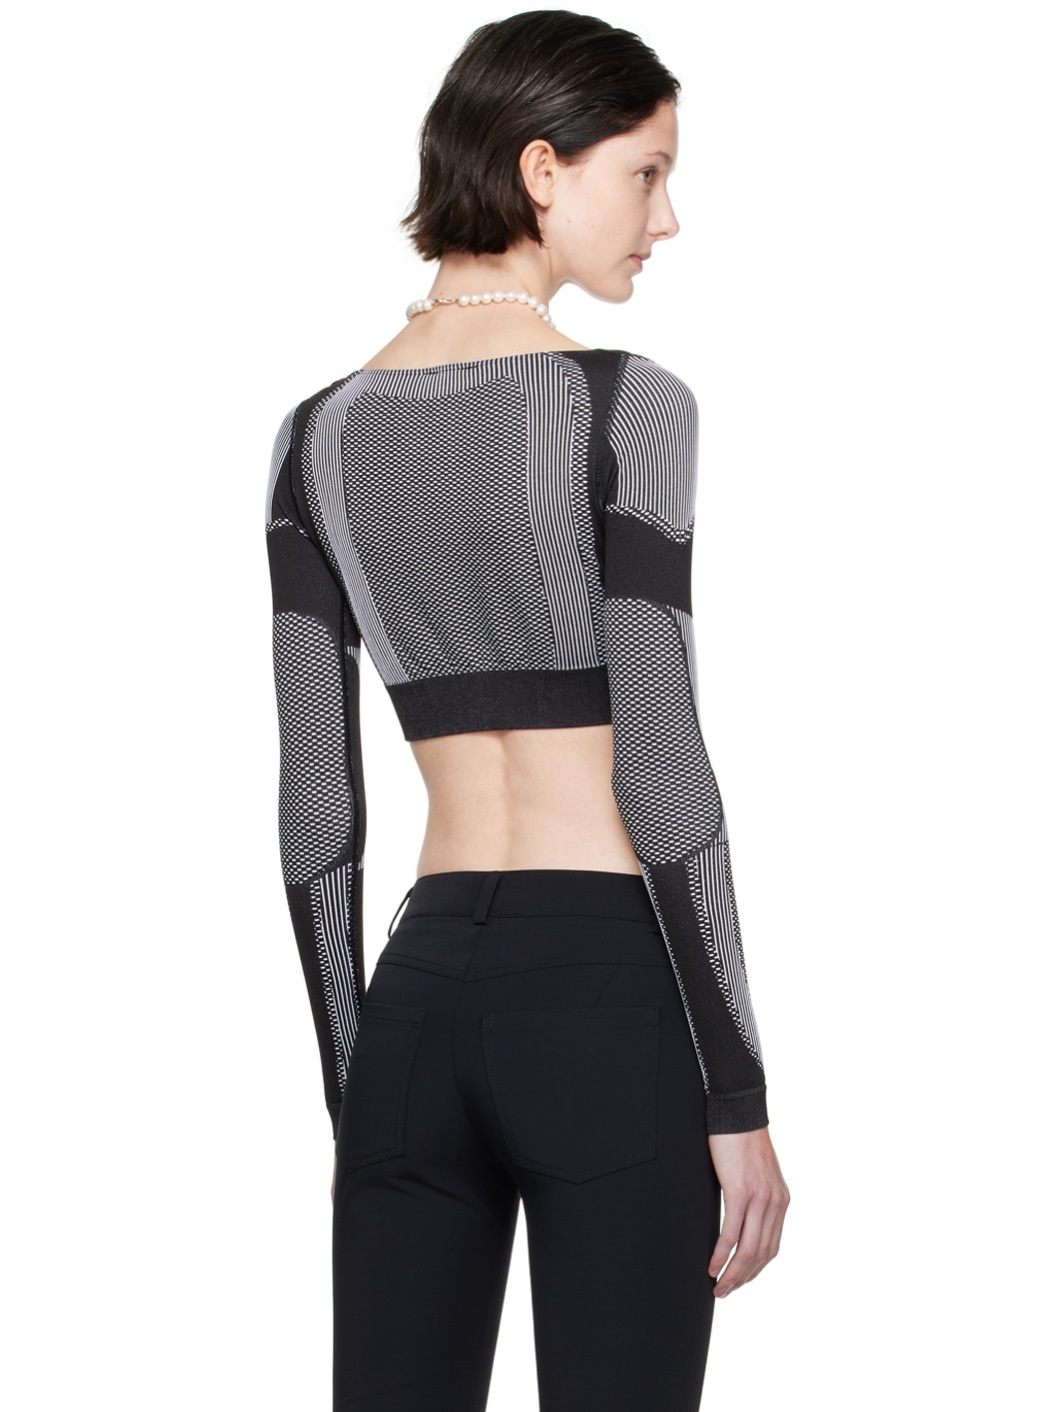 Black & White Cropped Sport Top - 3